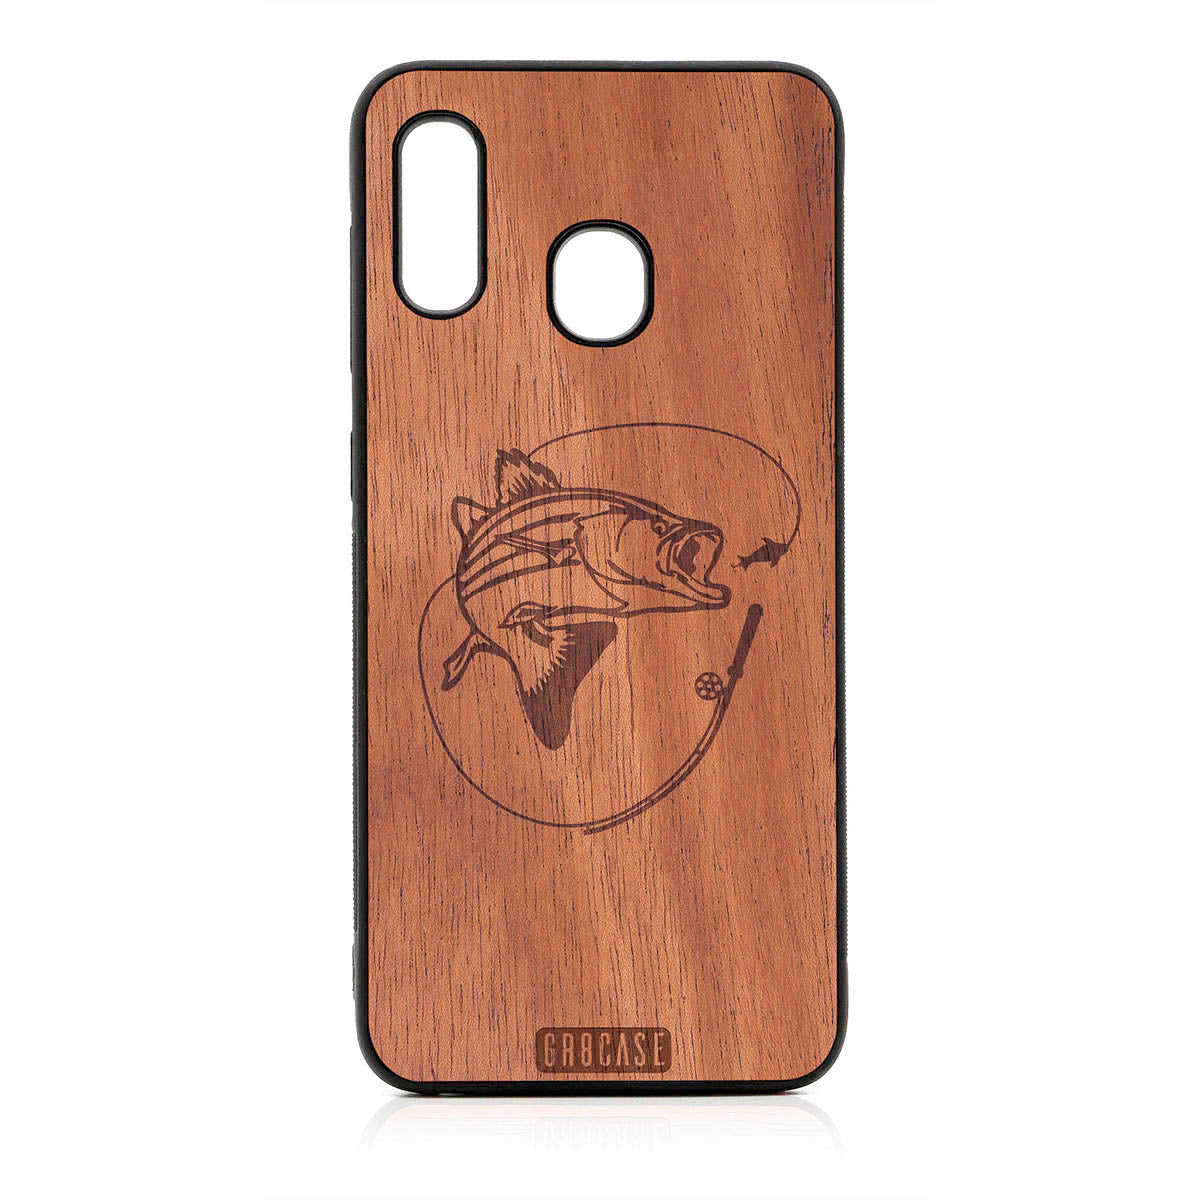 Fish and Reel Design Wood Case For Samsung Galaxy A20 by GR8CASE